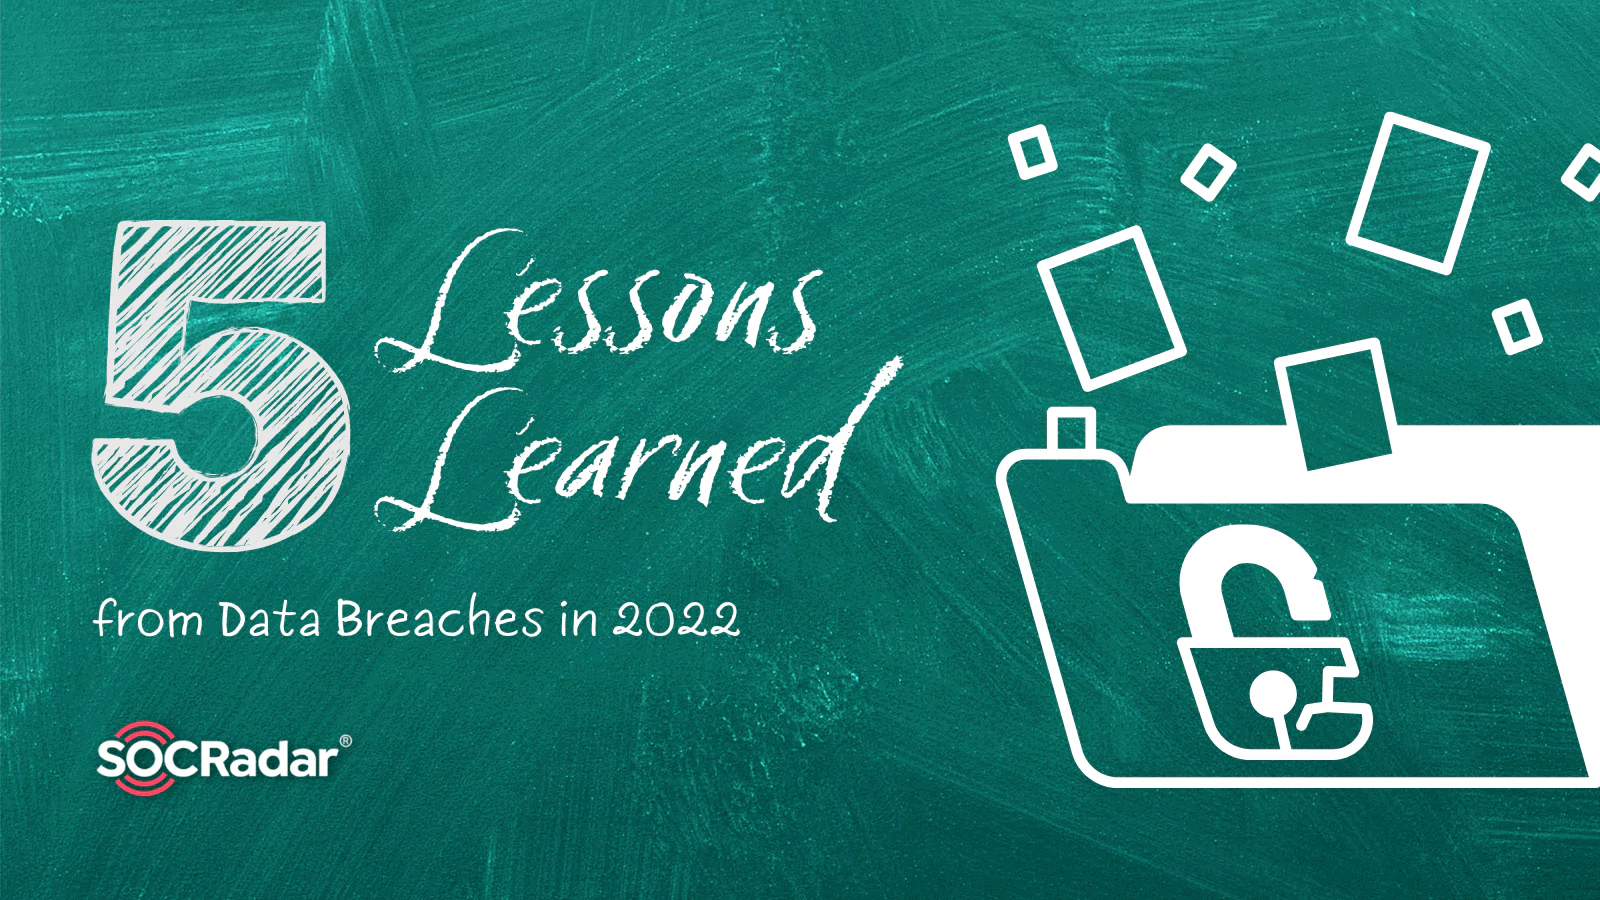 SOCRadar® Cyber Intelligence Inc. | 5 Lessons Learned from Data Breaches in 2022